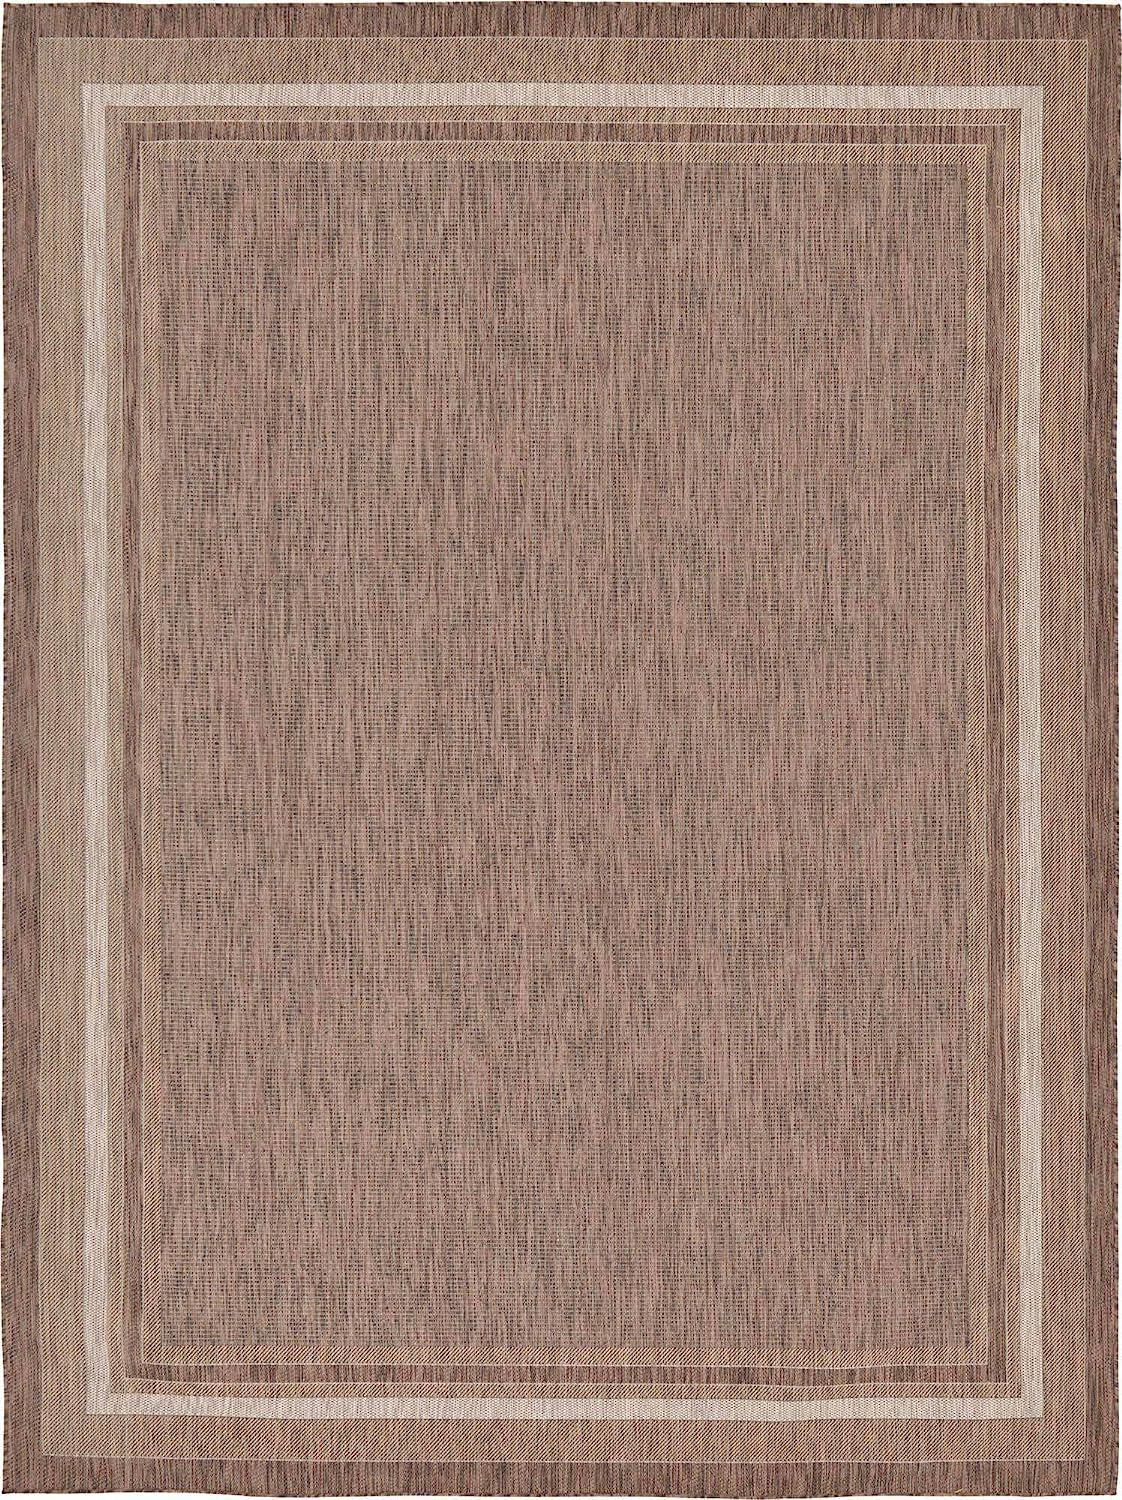 Outdoor Collection Transitional Indoor and Outdoor Casual Solid Tonal Border Area Rug, Rectangular , Brown/Ivory